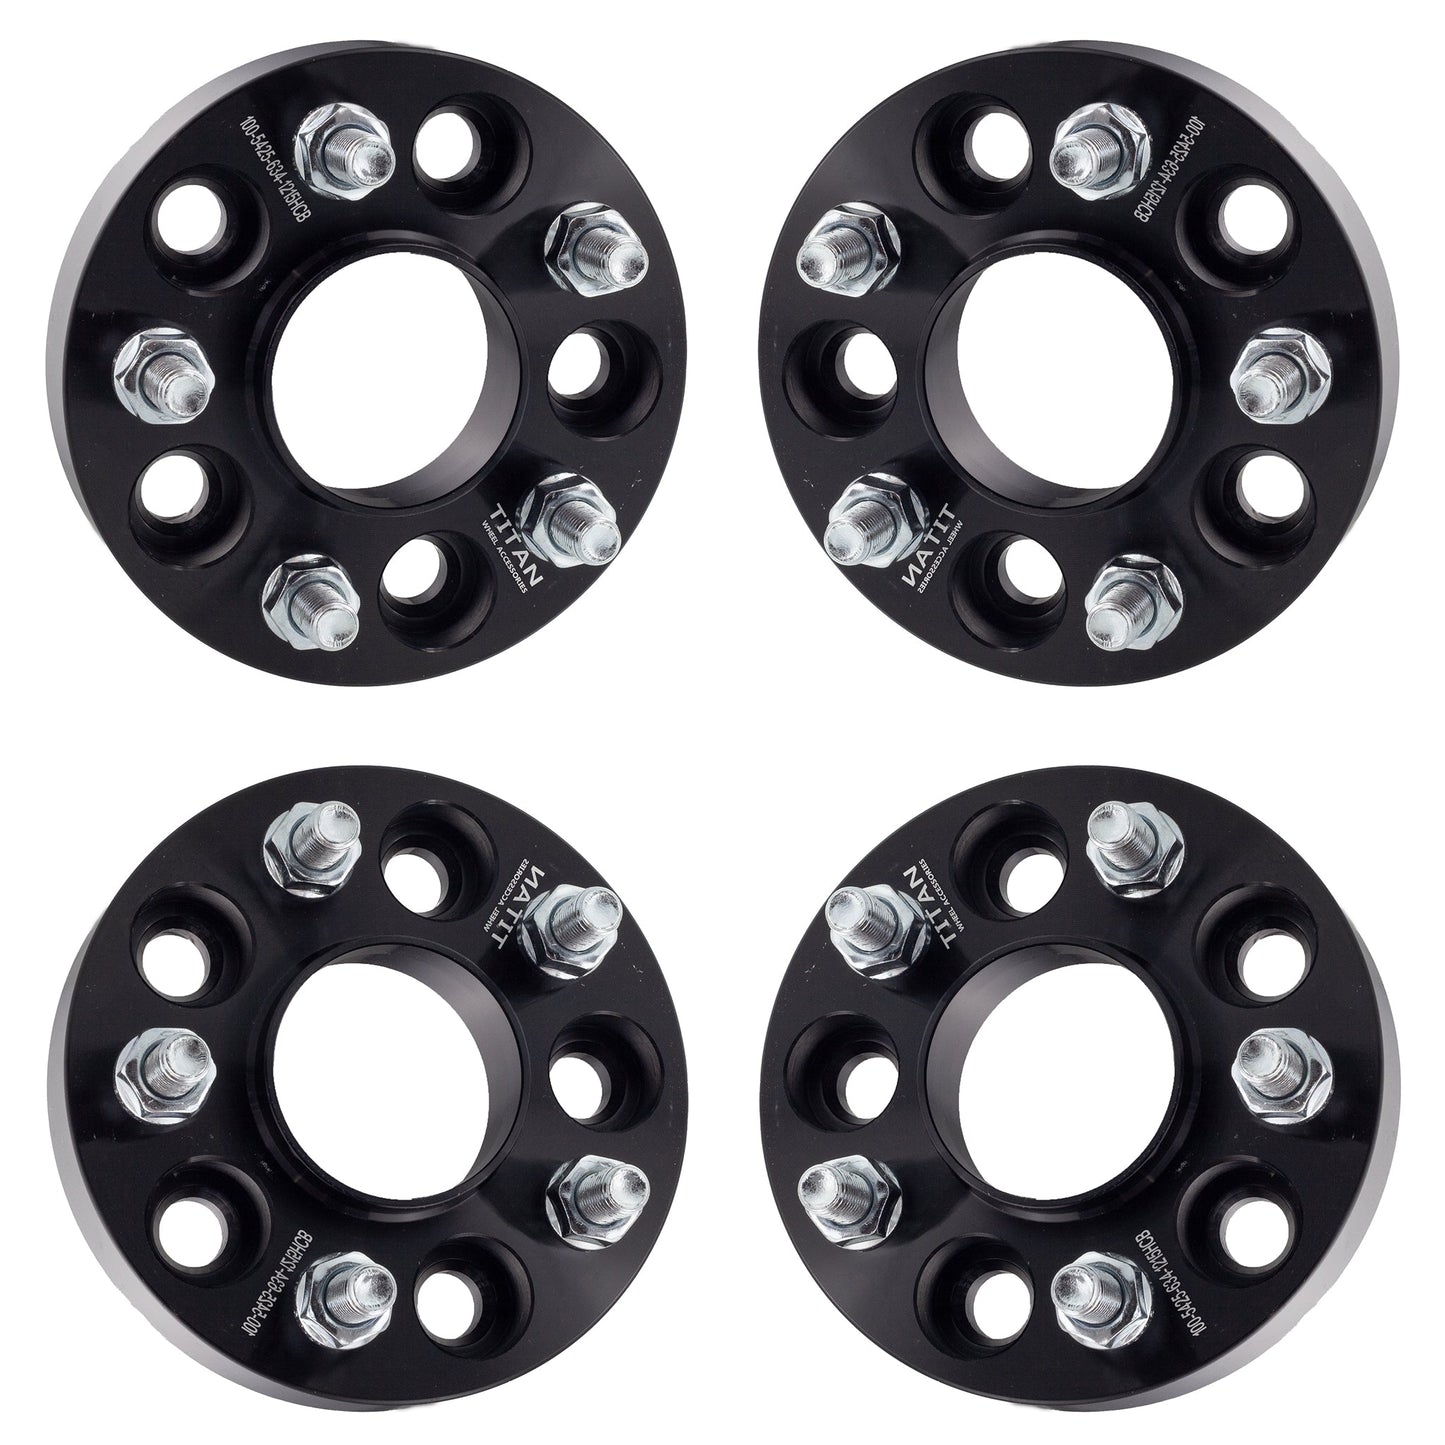 1" (25mm) Titan Wheel Spacers for Lincoln Continental LS MKC MKZ Mercury Monterey | 5x4.25 (5x108) | 63.4 Hubcentric | 12x1.5 Studs |  Set of 4